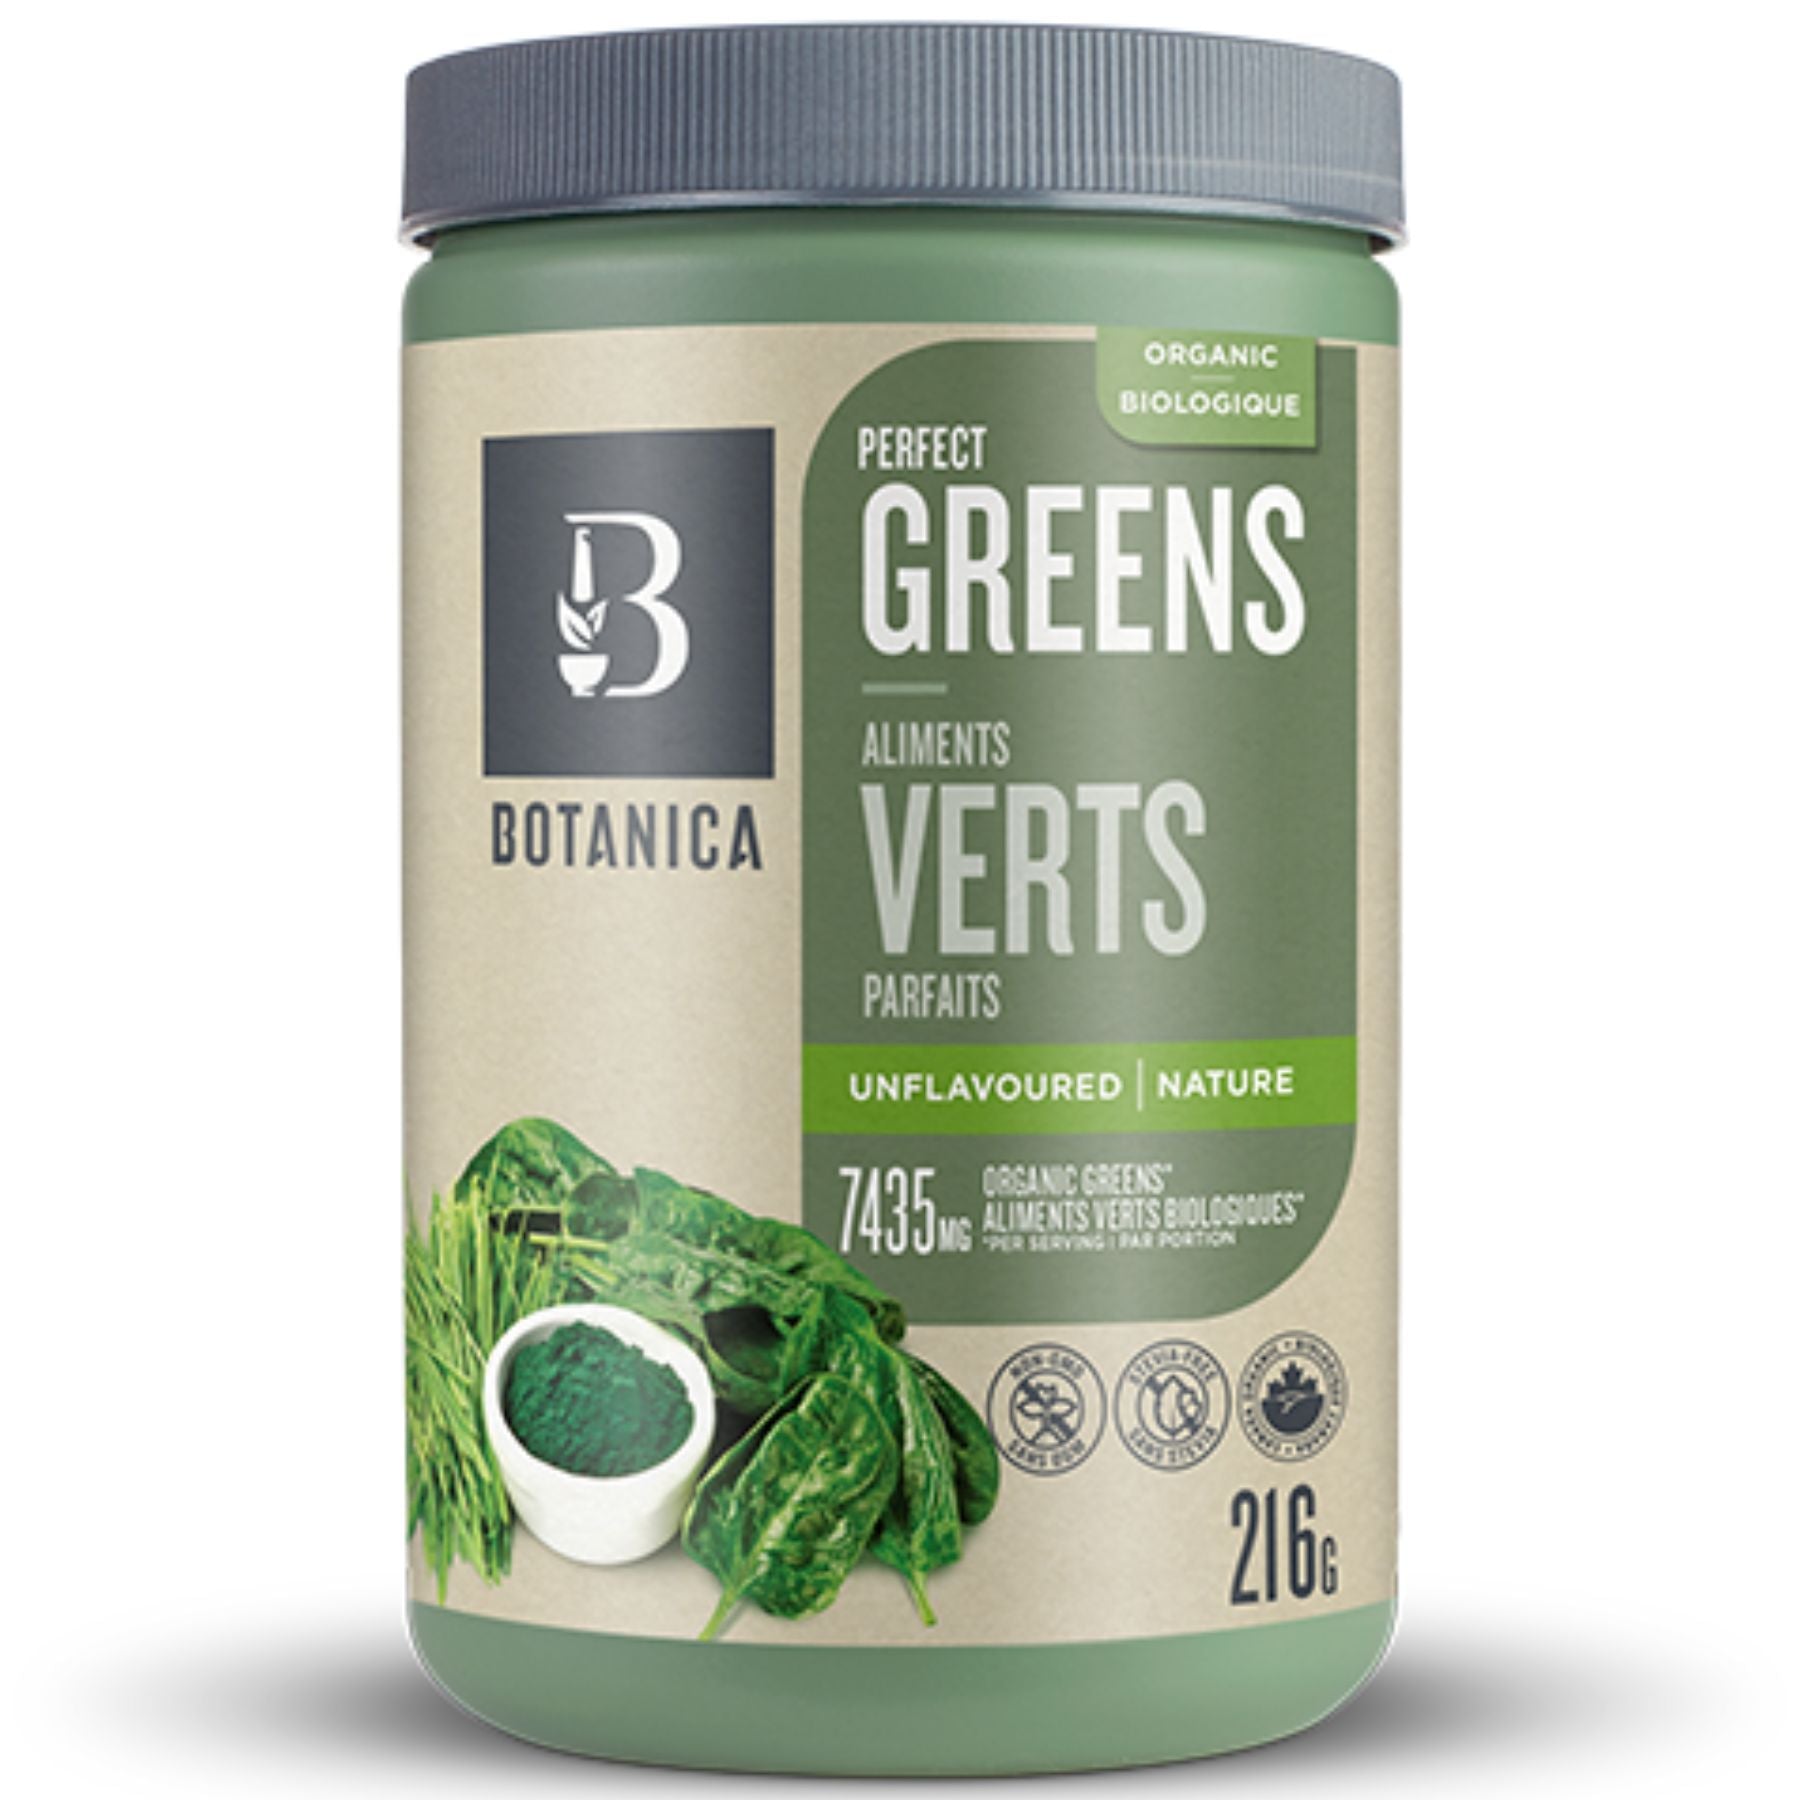 Botanica Perfect Greens Unflavoured 216g